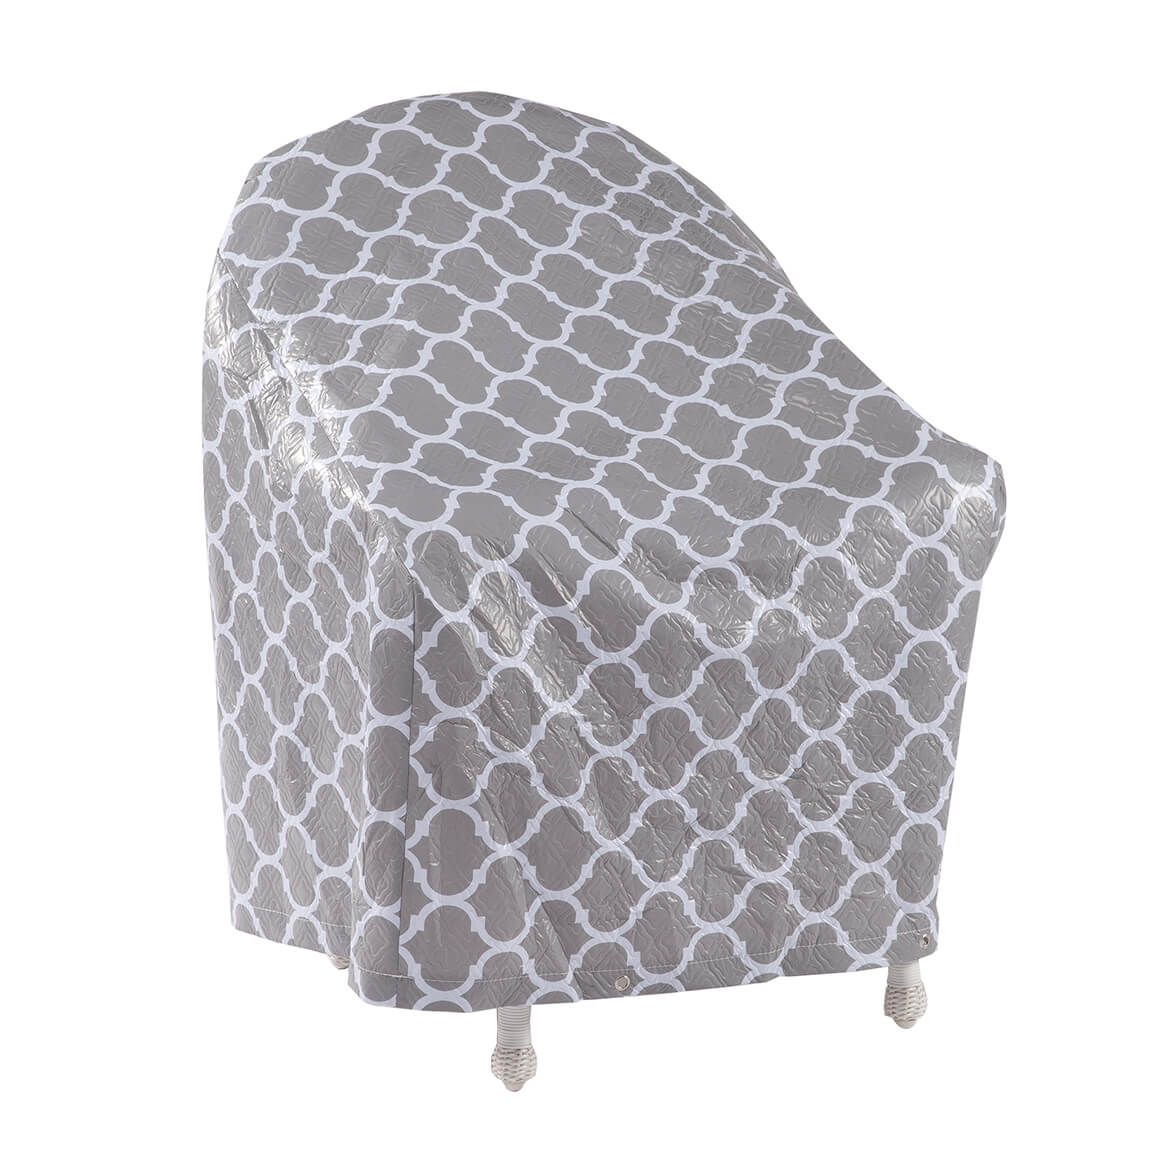 Trellis Pattern Quilted Chair Cover, 33"L x 33"H x 27"W + '-' + 362893